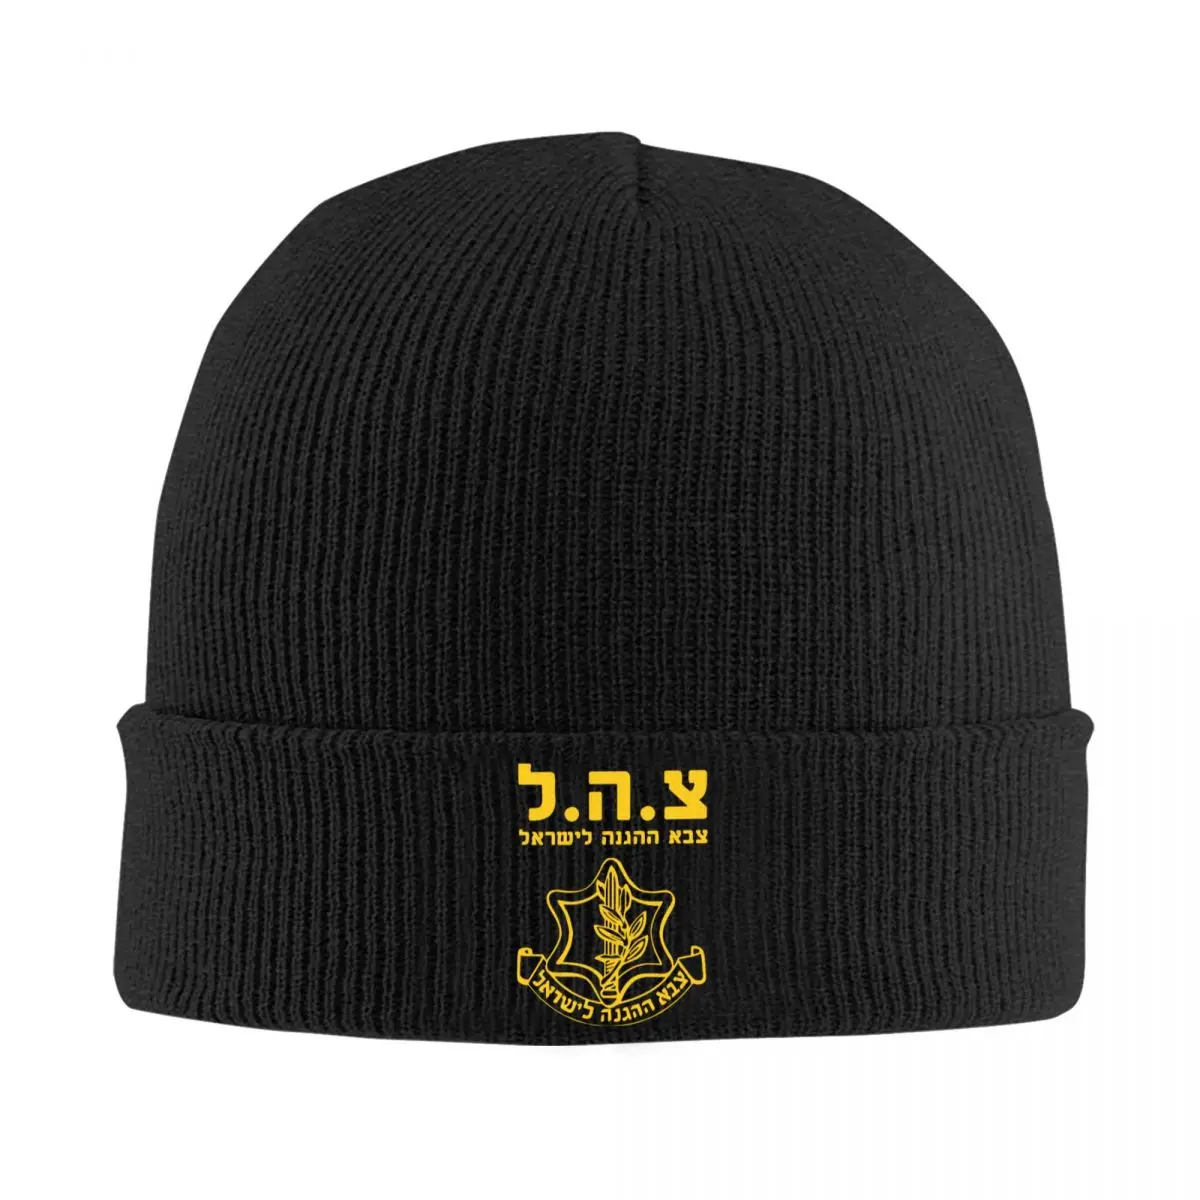 

IDF Israel Defense Forces Knitted Caps for Women Men Beanies Autumn Winter Hats Military Army Warm Melon Cap